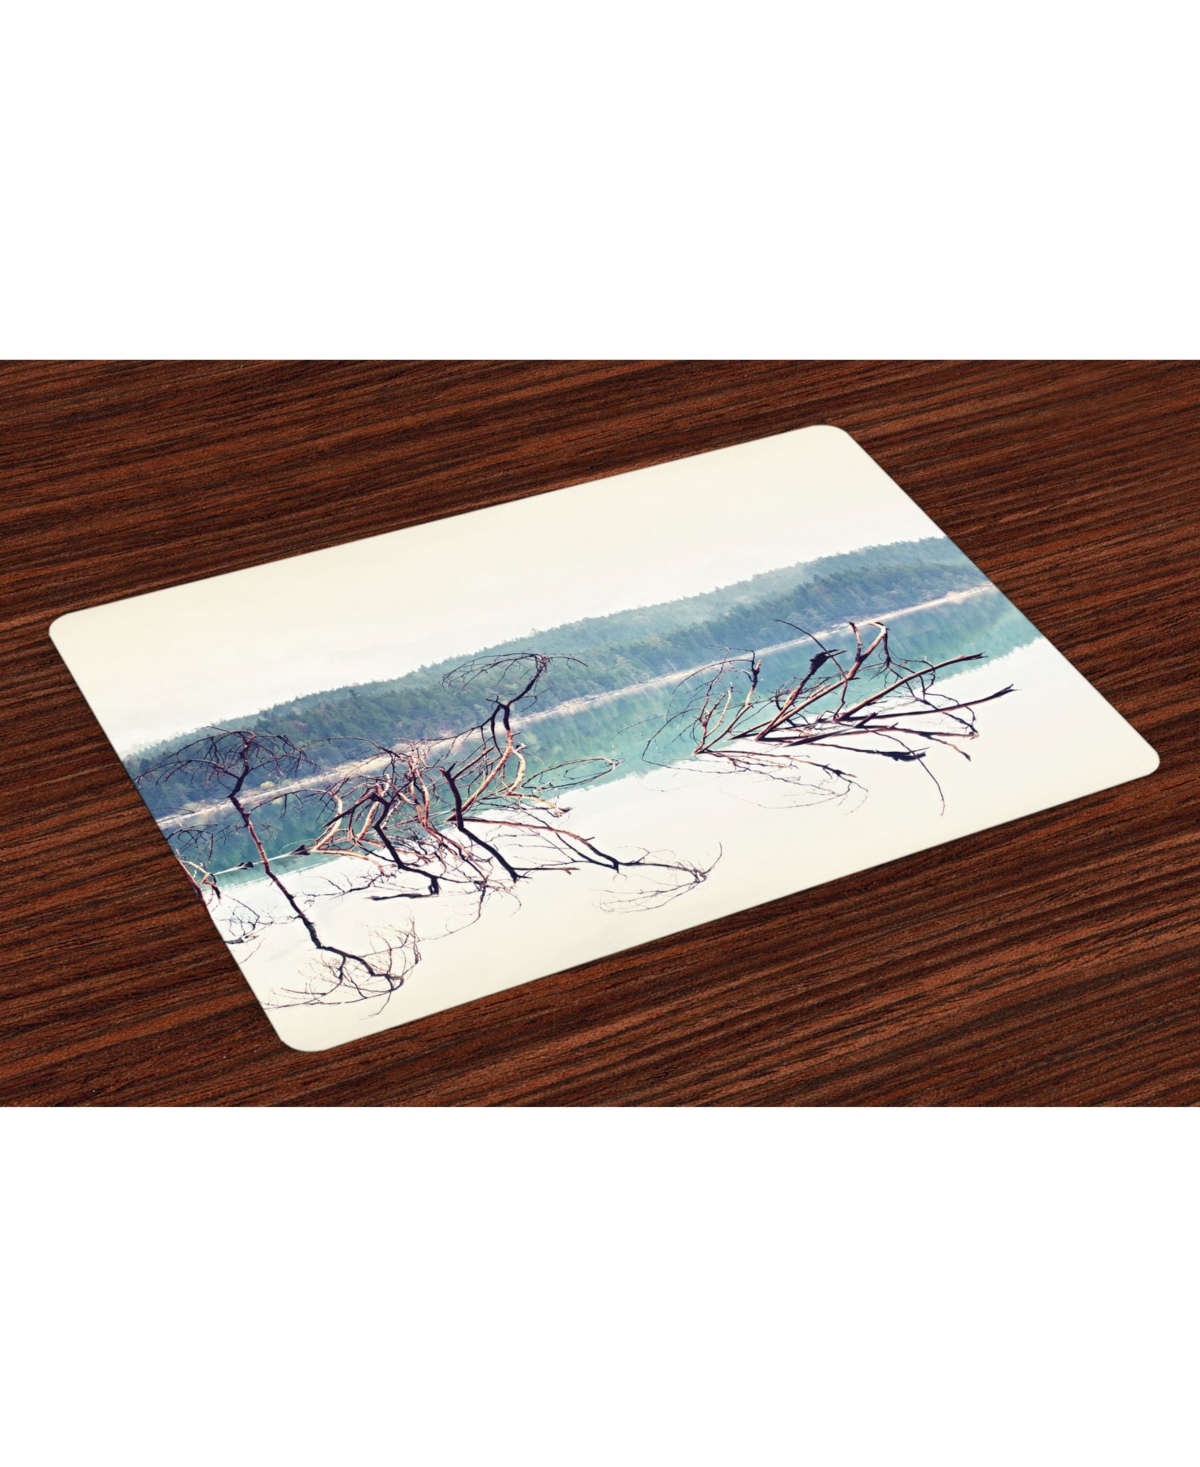 AMBESONNE DRIFTWOOD PLACE MATS, SET OF 4